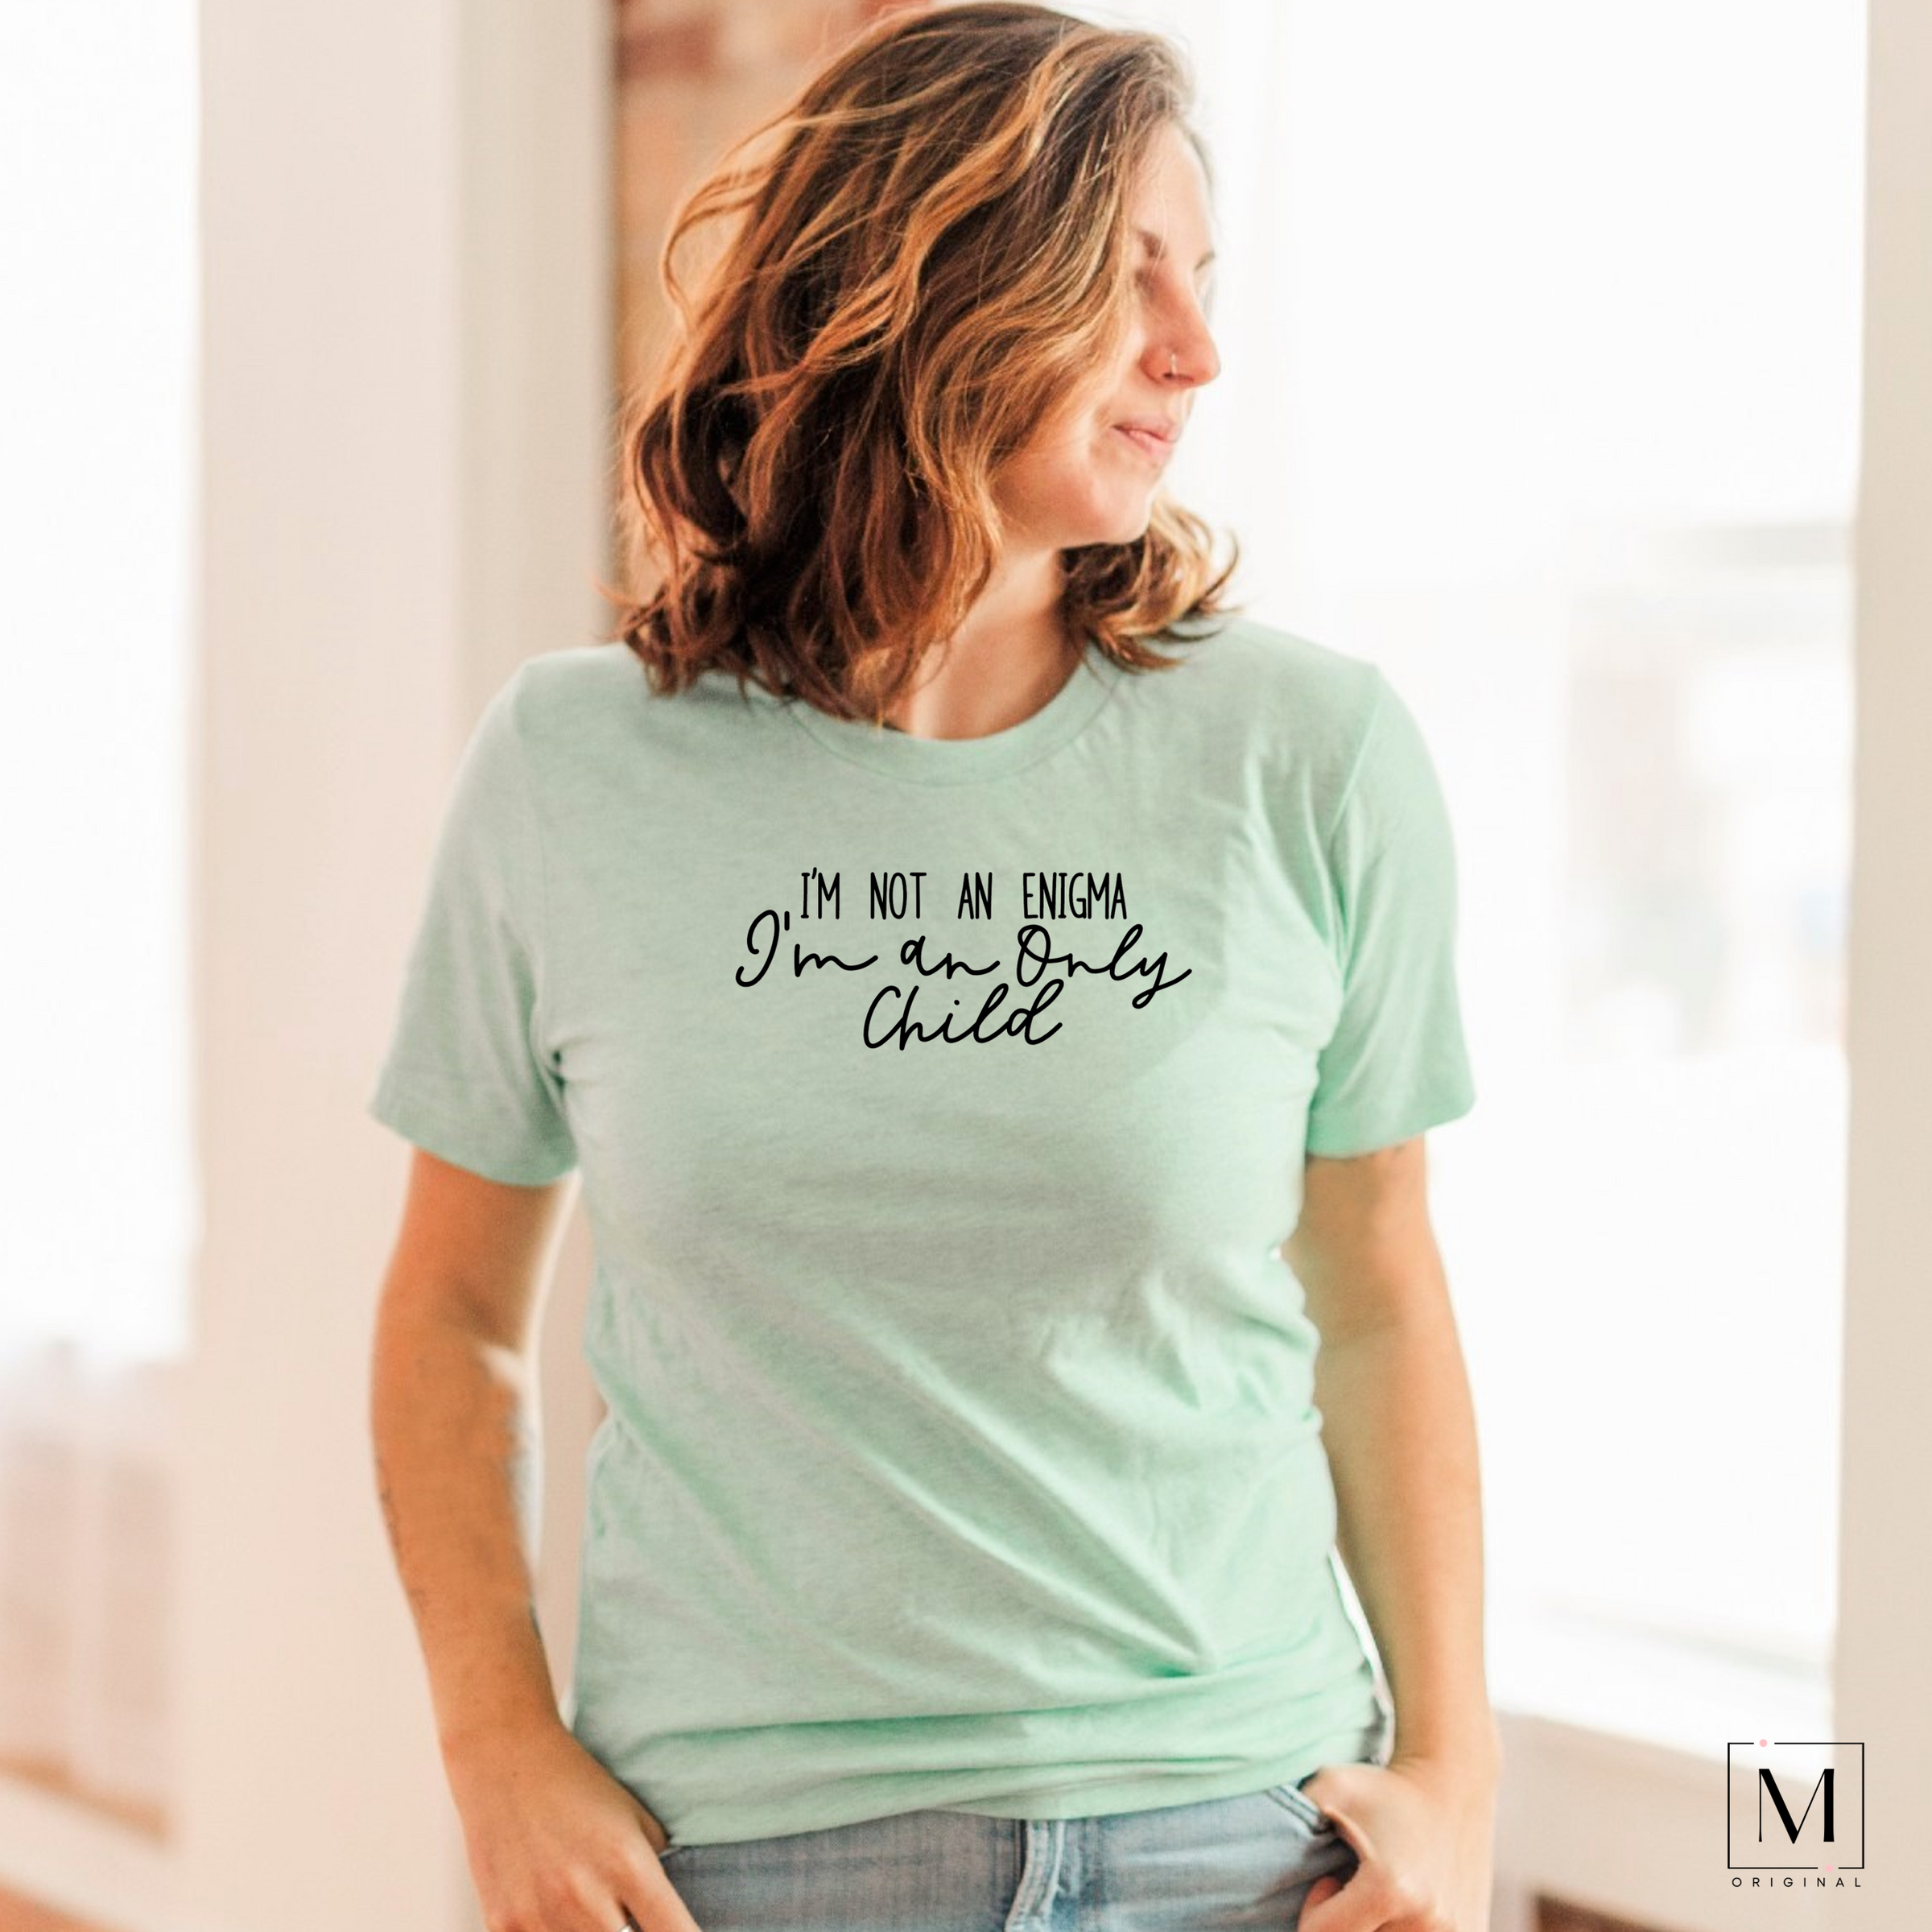 A woman wearing a Bella Canvas 3001cvc heather prism mint t-shirt with black lettering reading I'm not and enigma I'm an only child. Part of Moxie Momma's exclusive only child line.